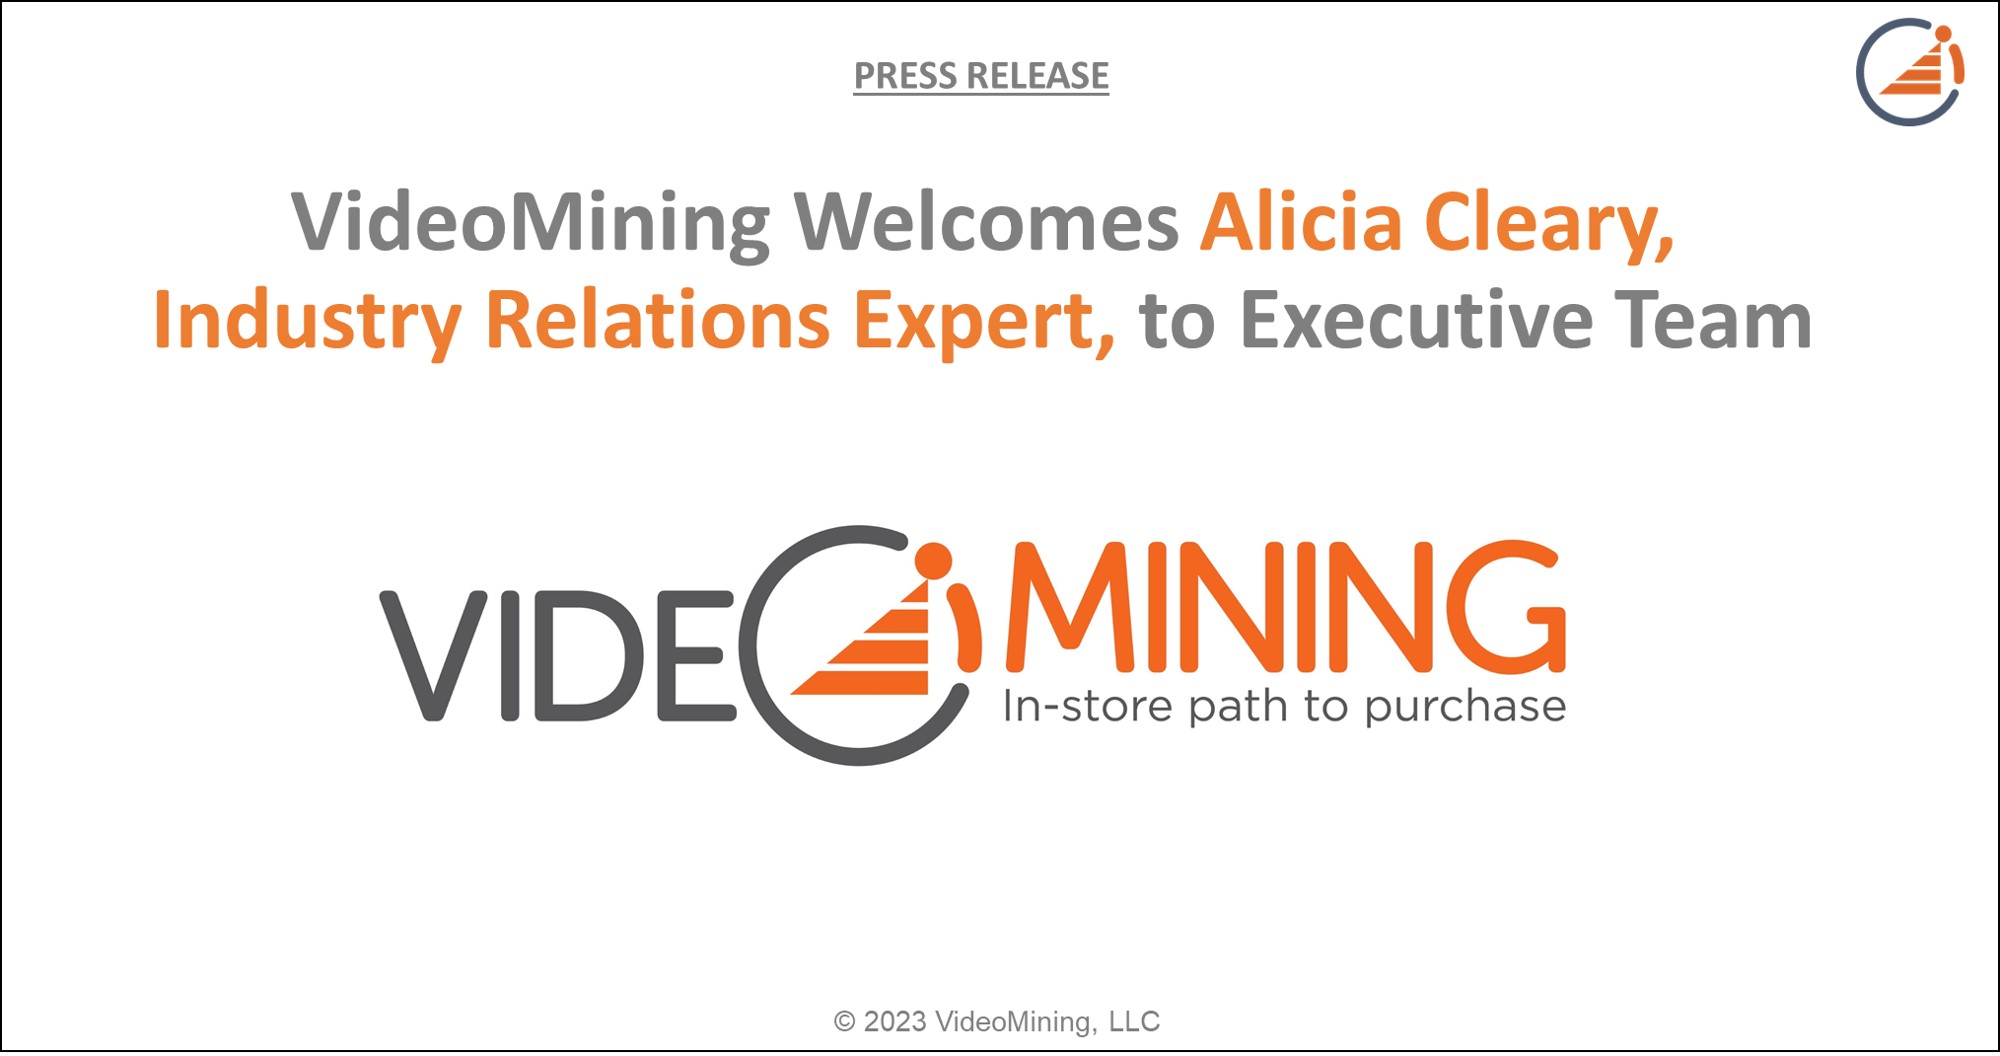 VideoMining Welcomes Alicia Cleary, Industry Relations Expert, to Executive Team